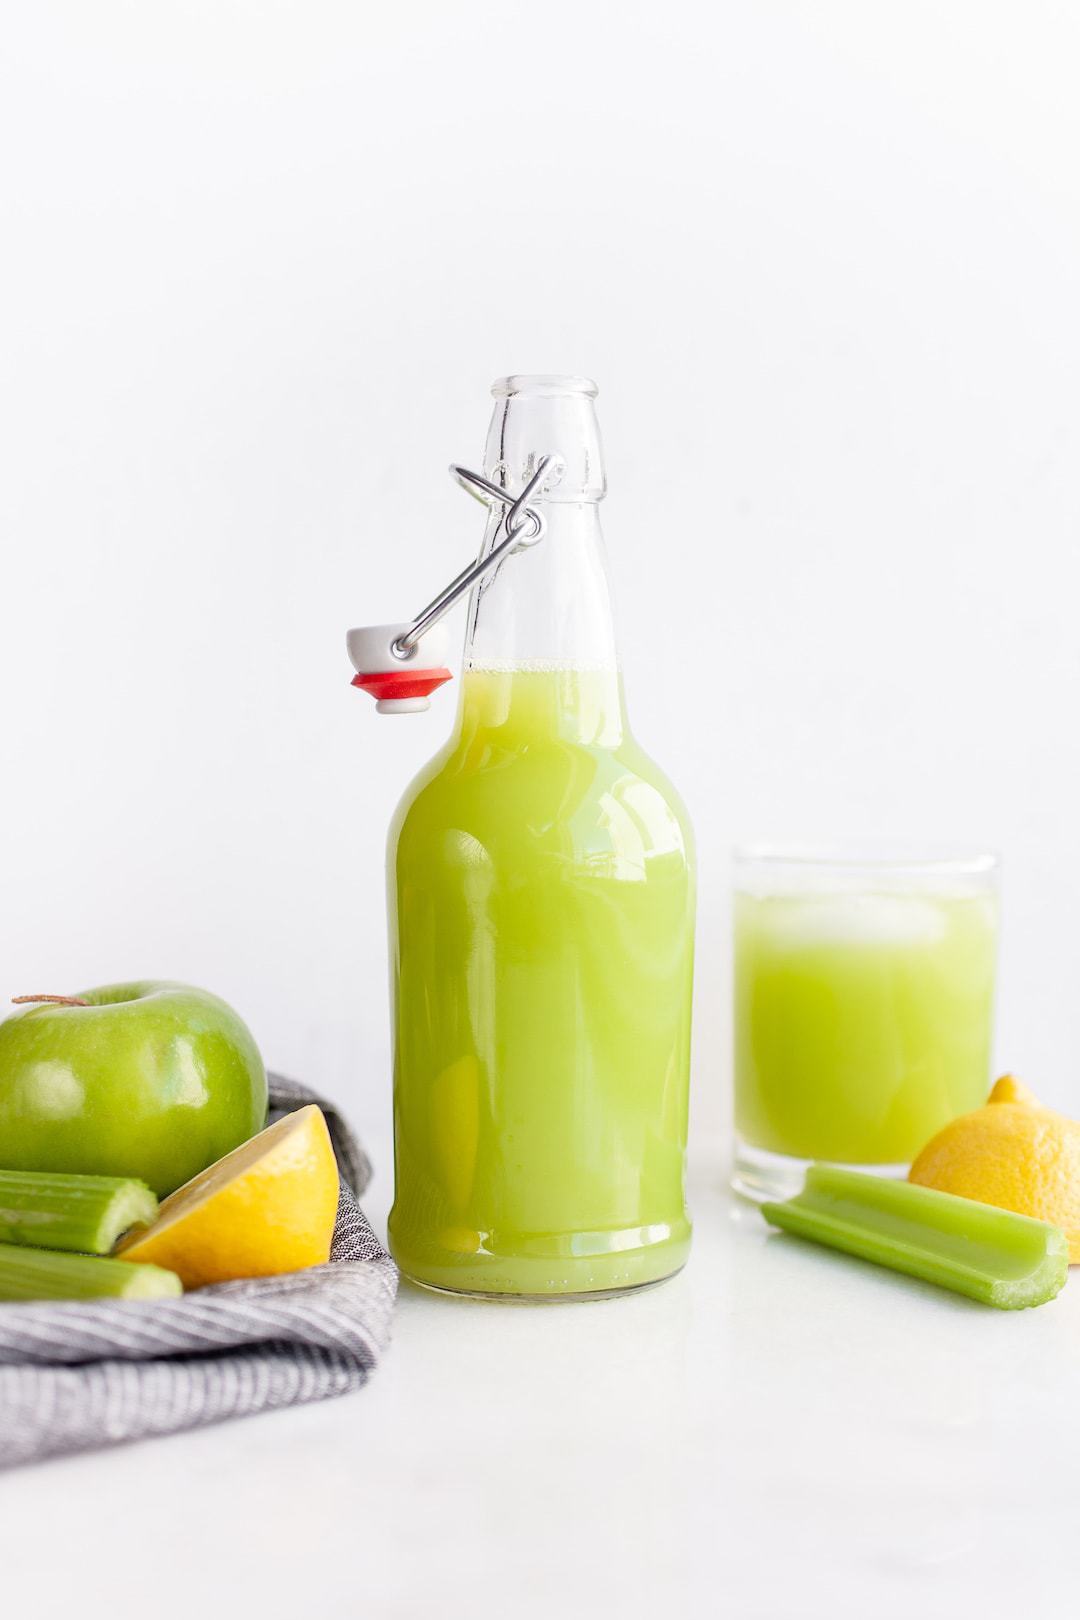 Jar of green celery juice with apples and celery on the side